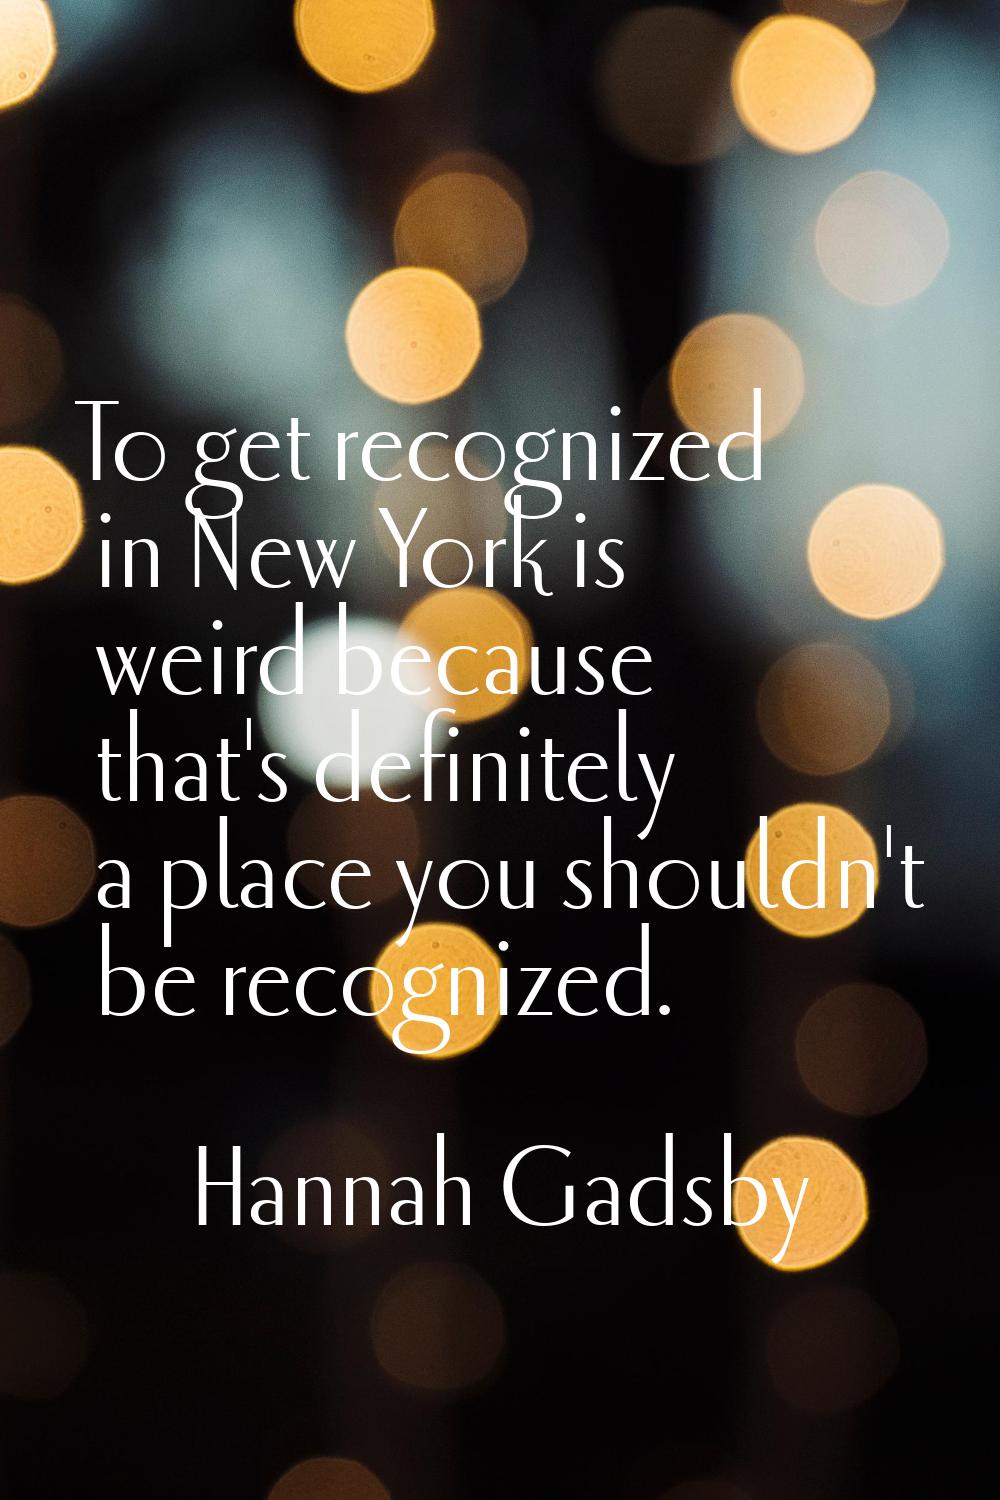 To get recognized in New York is weird because that's definitely a place you shouldn't be recognize